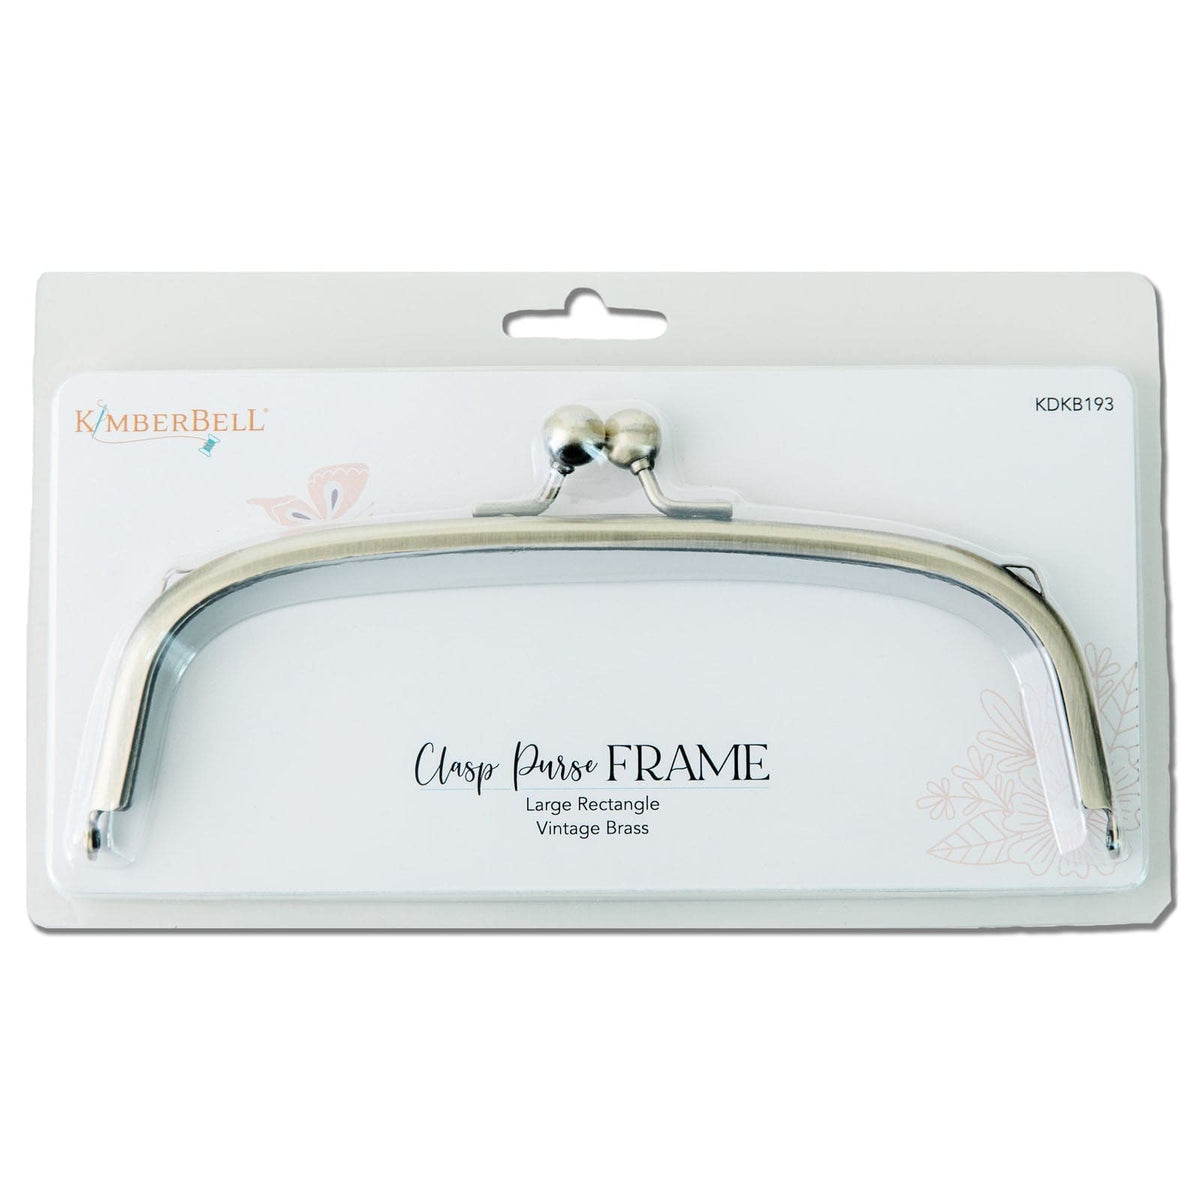 Buy Sew in Purse Frame Online In India - Etsy India